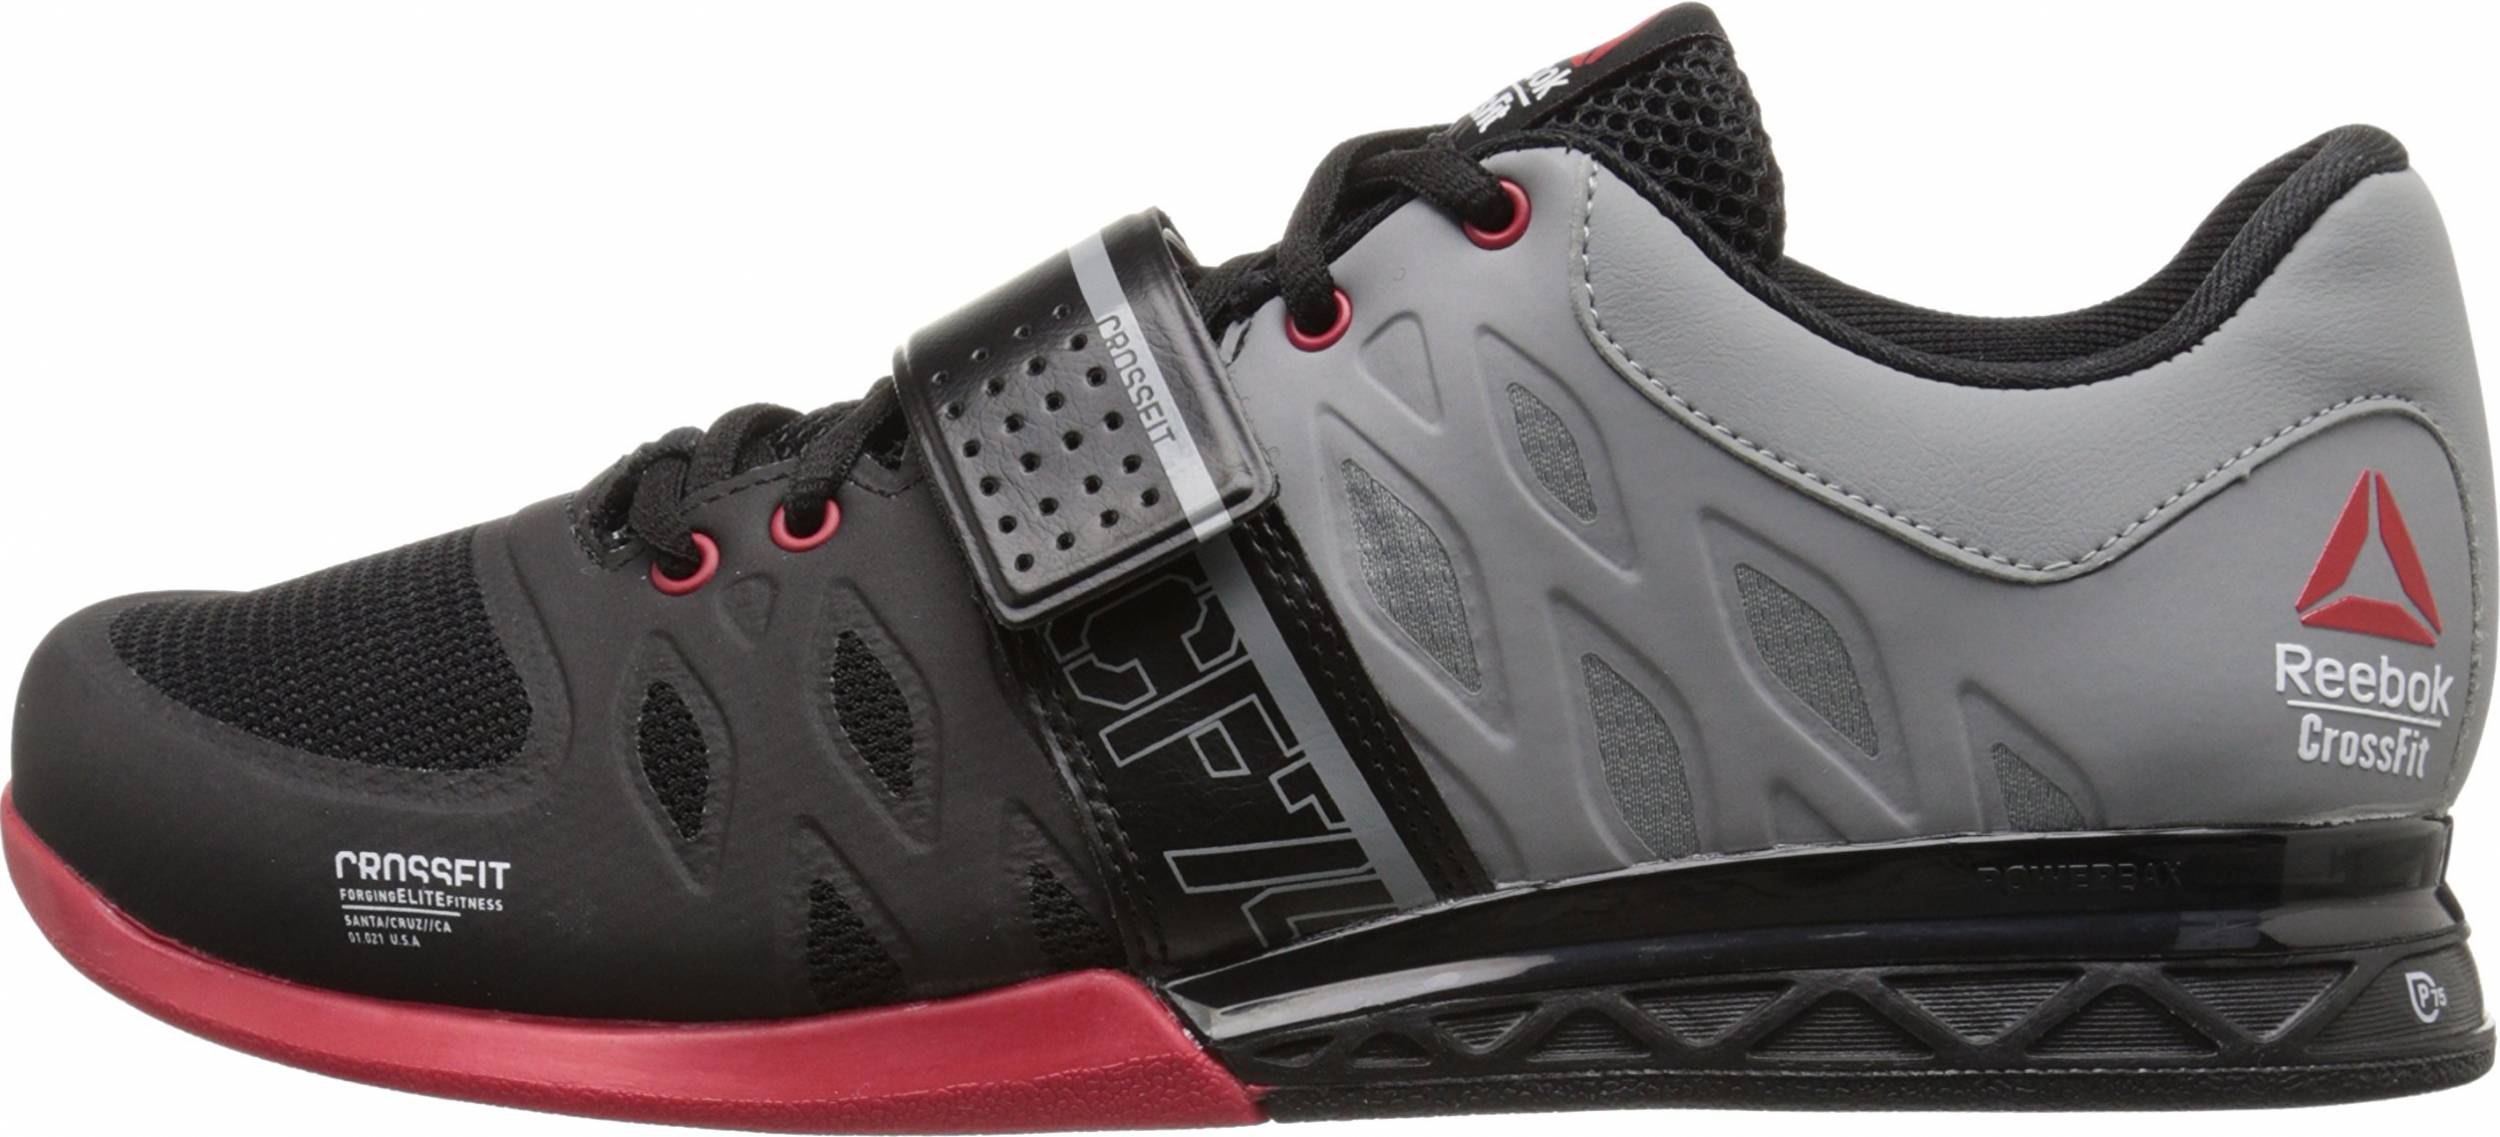 Save 42% on Reebok Weightlifting Shoes 